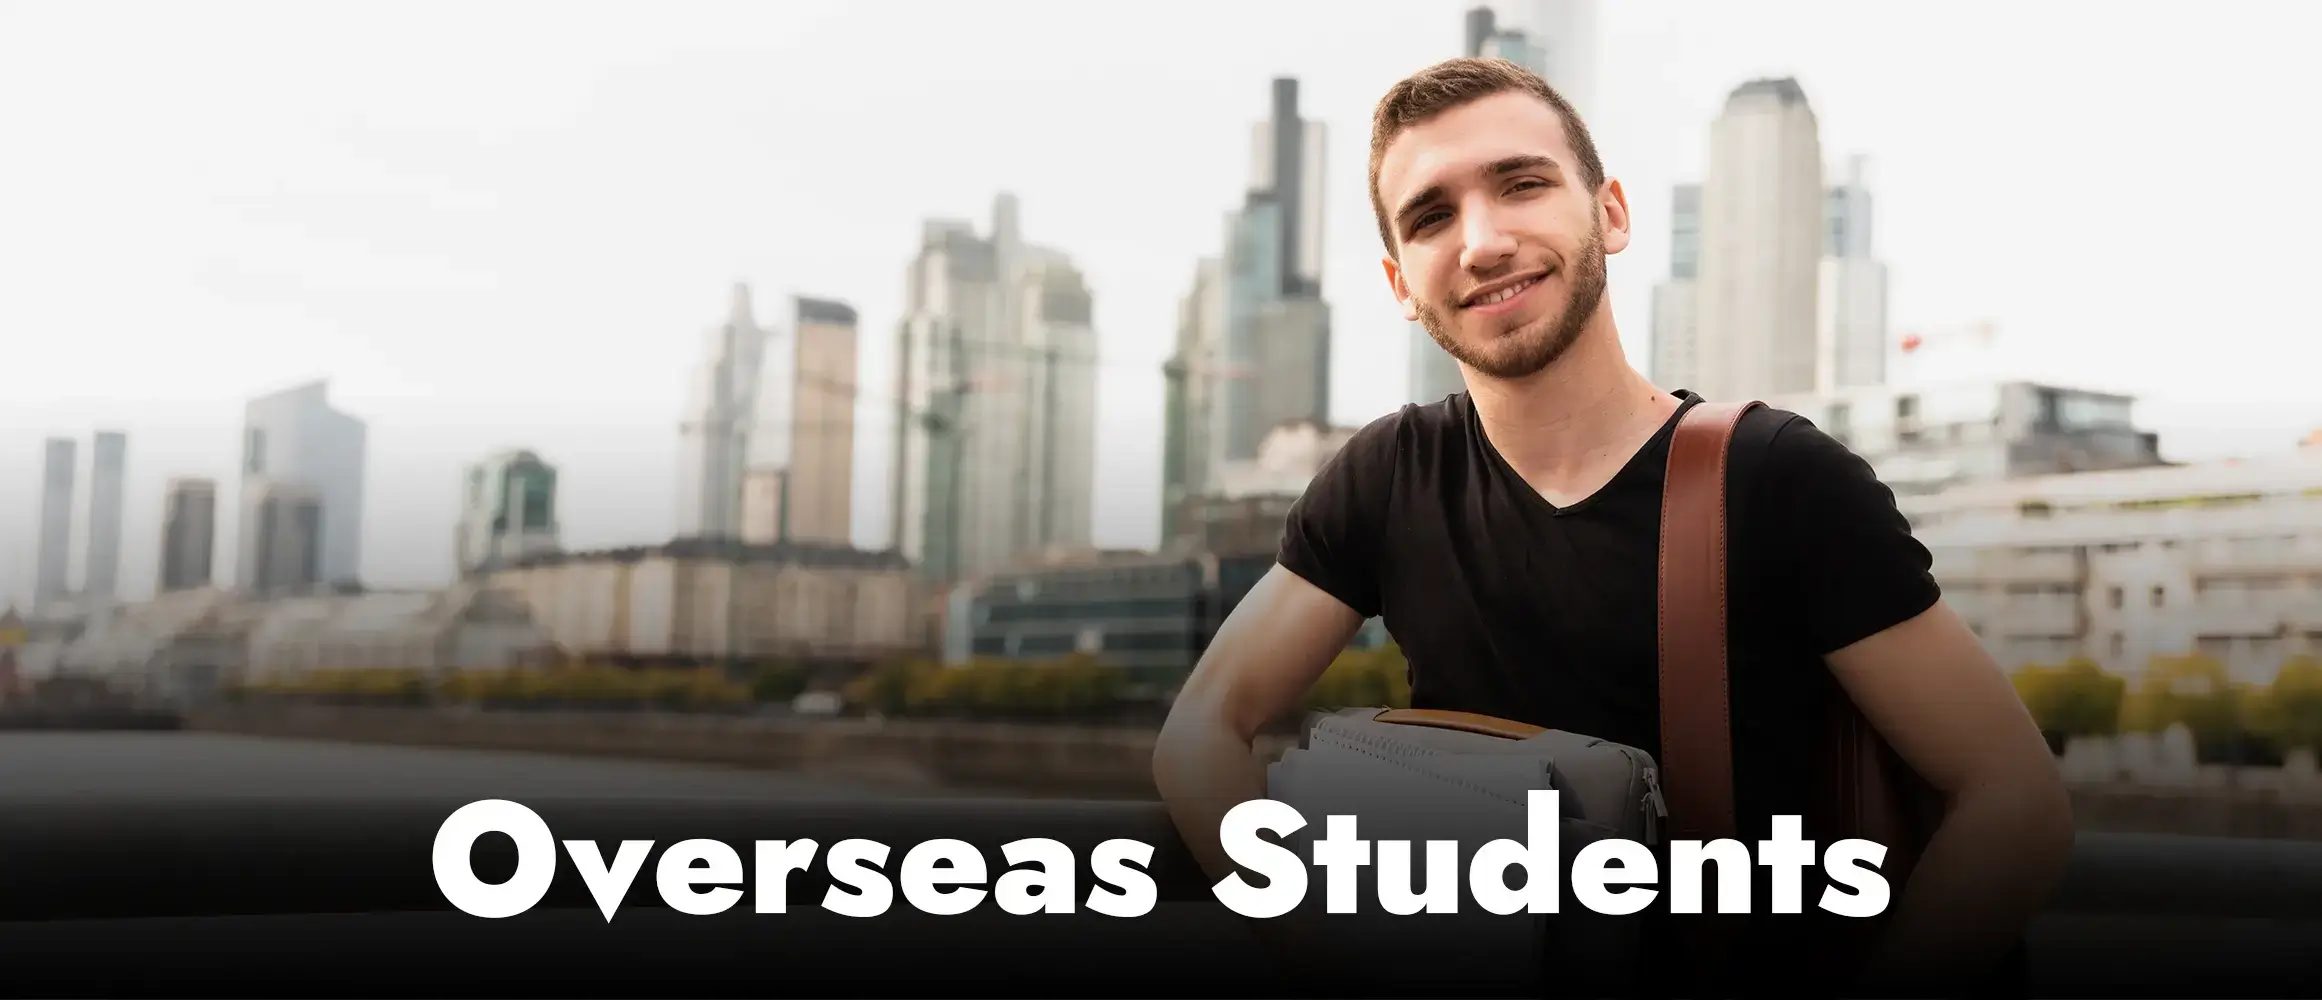 What is the Life Like for Overseas Students Studying in Australia